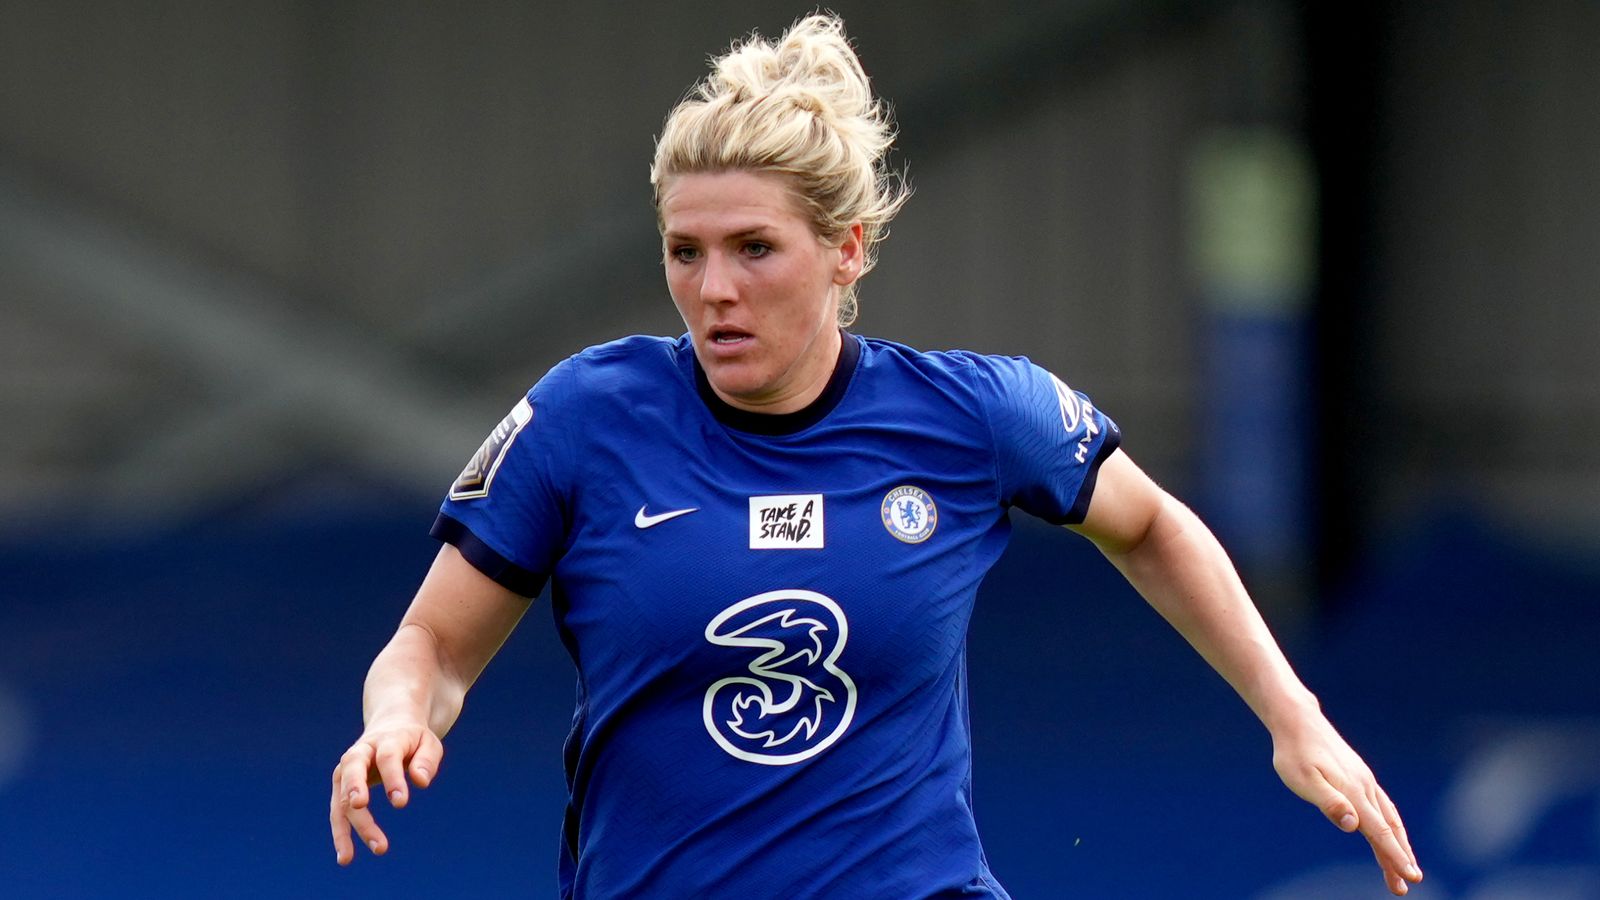 Millie Bright is regarded as one of the top female defenders